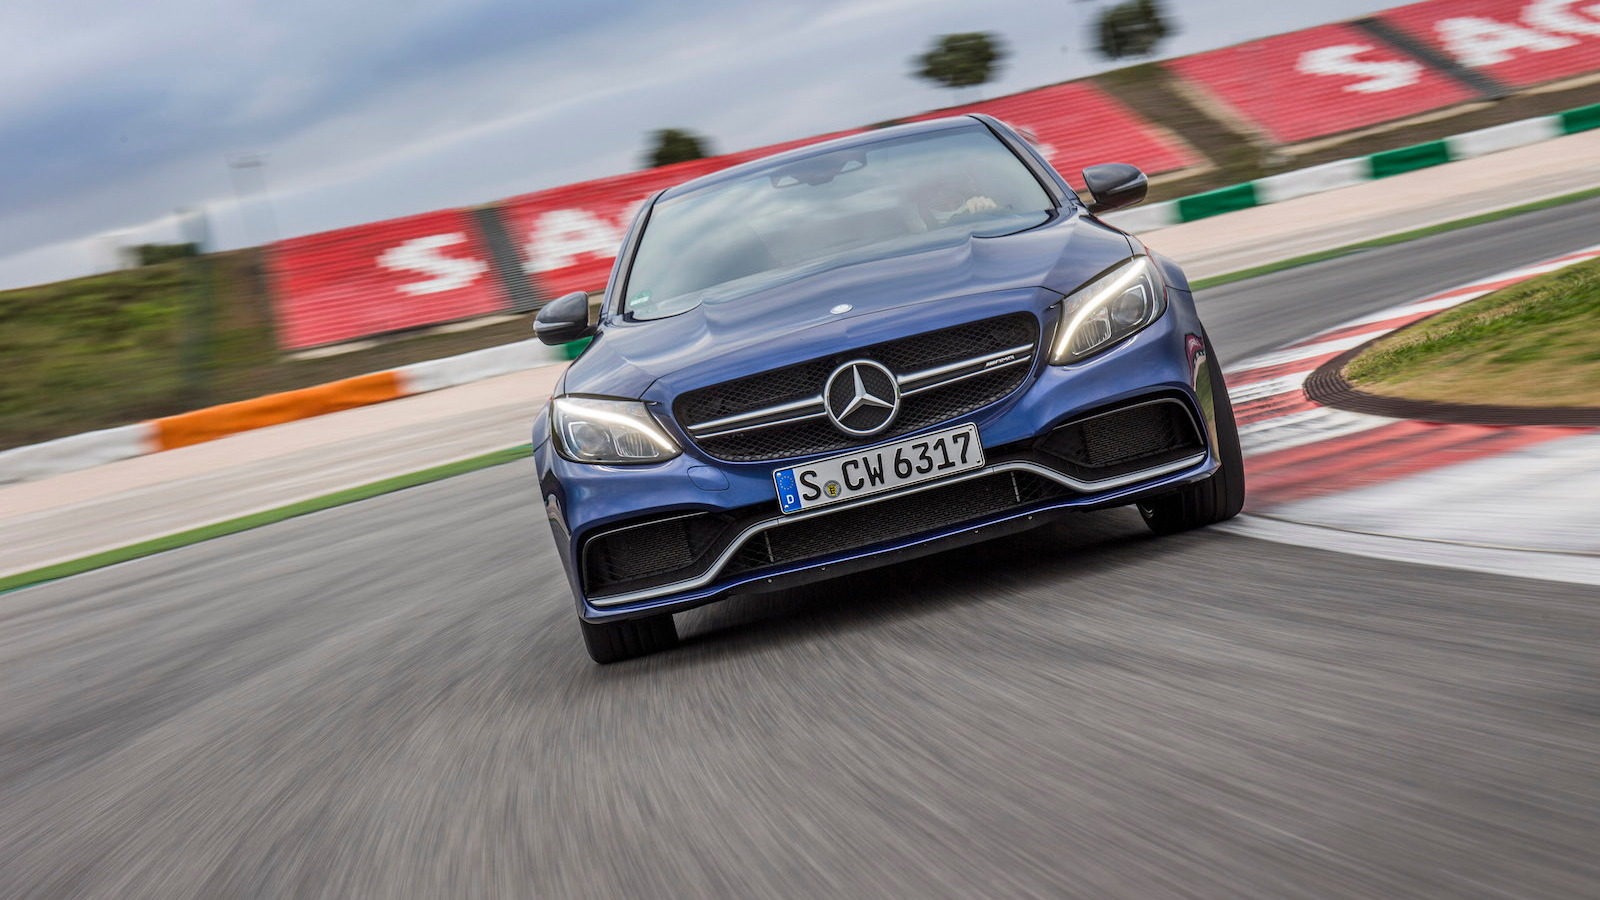 2015 Mercedes-AMG C63 S first drive, Portugal